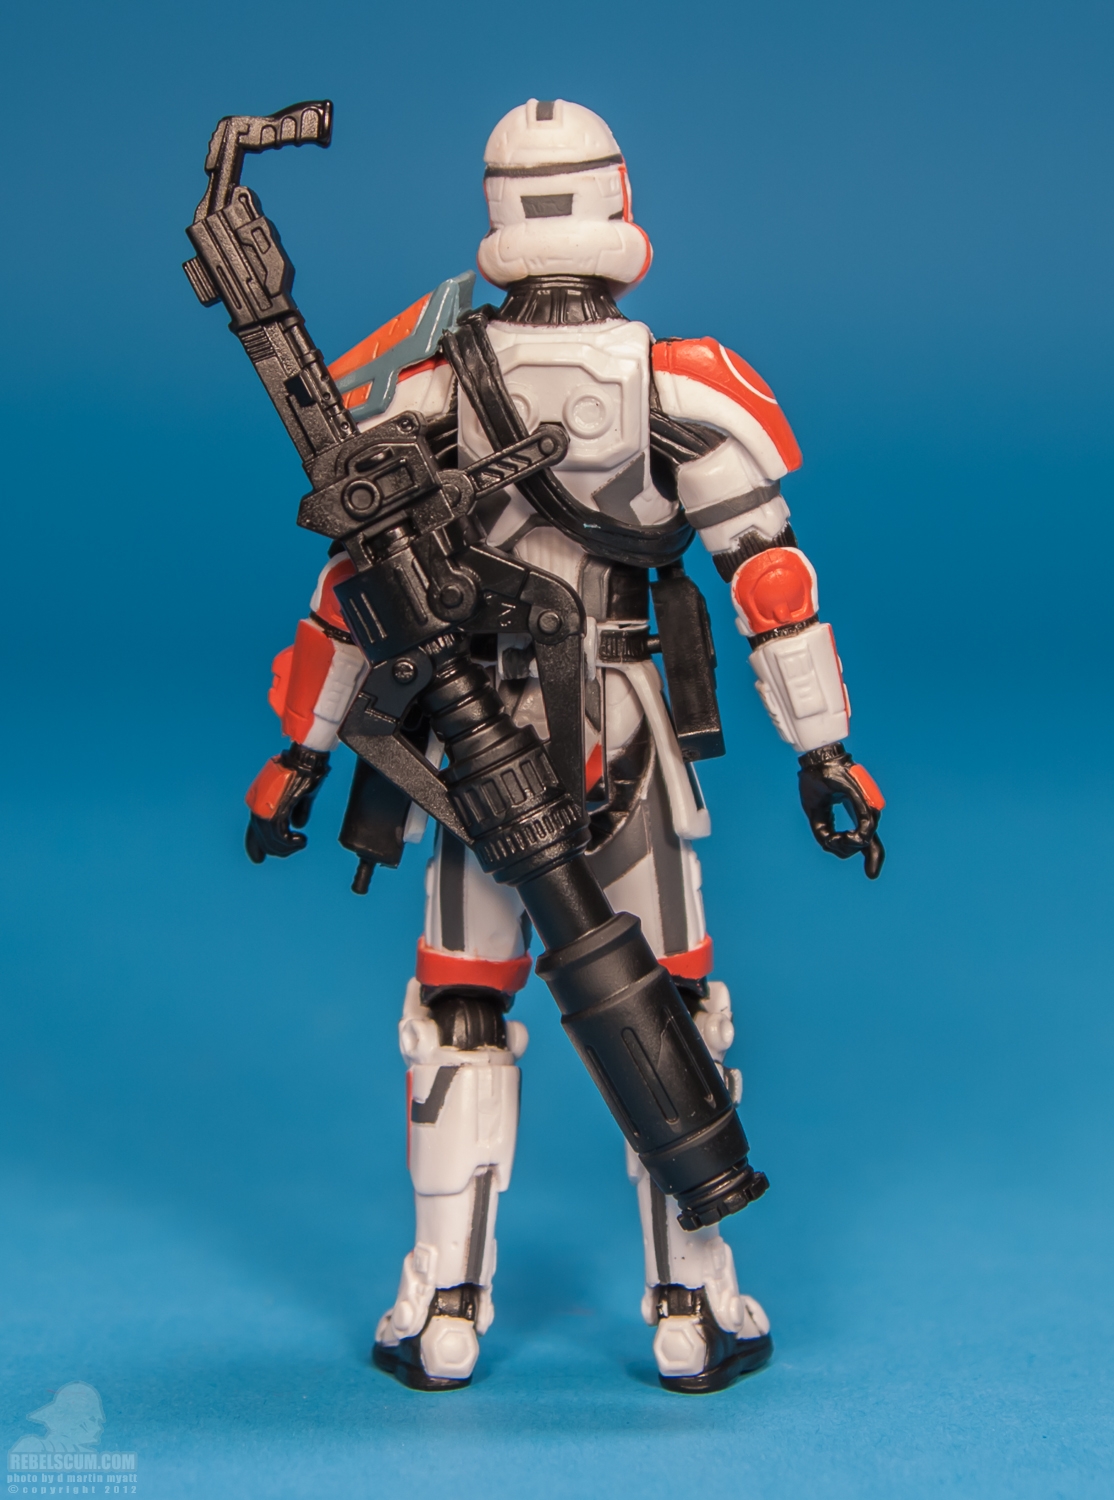 Republic_Trooper_The_Old_Republic_Vintage_Collection_TVC_VC113-08.jpg